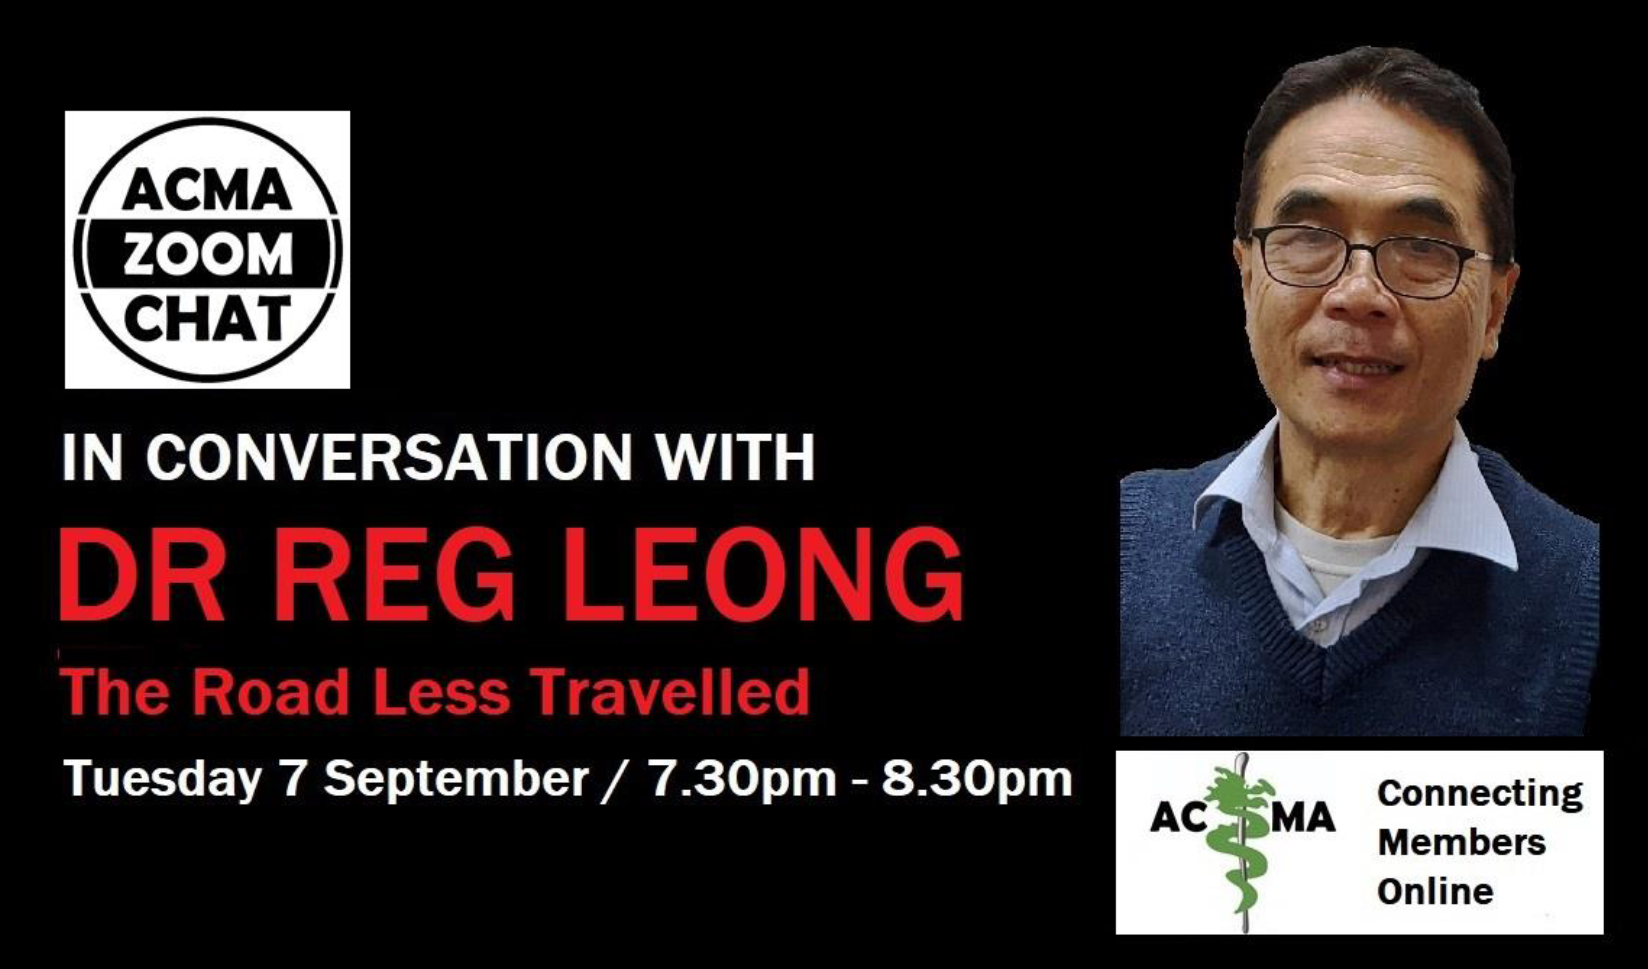 ACMA Chat Event Banner, featuring A/Prof Stephen LiACMA Chat Event Banner, featuring Dr Reg Leong